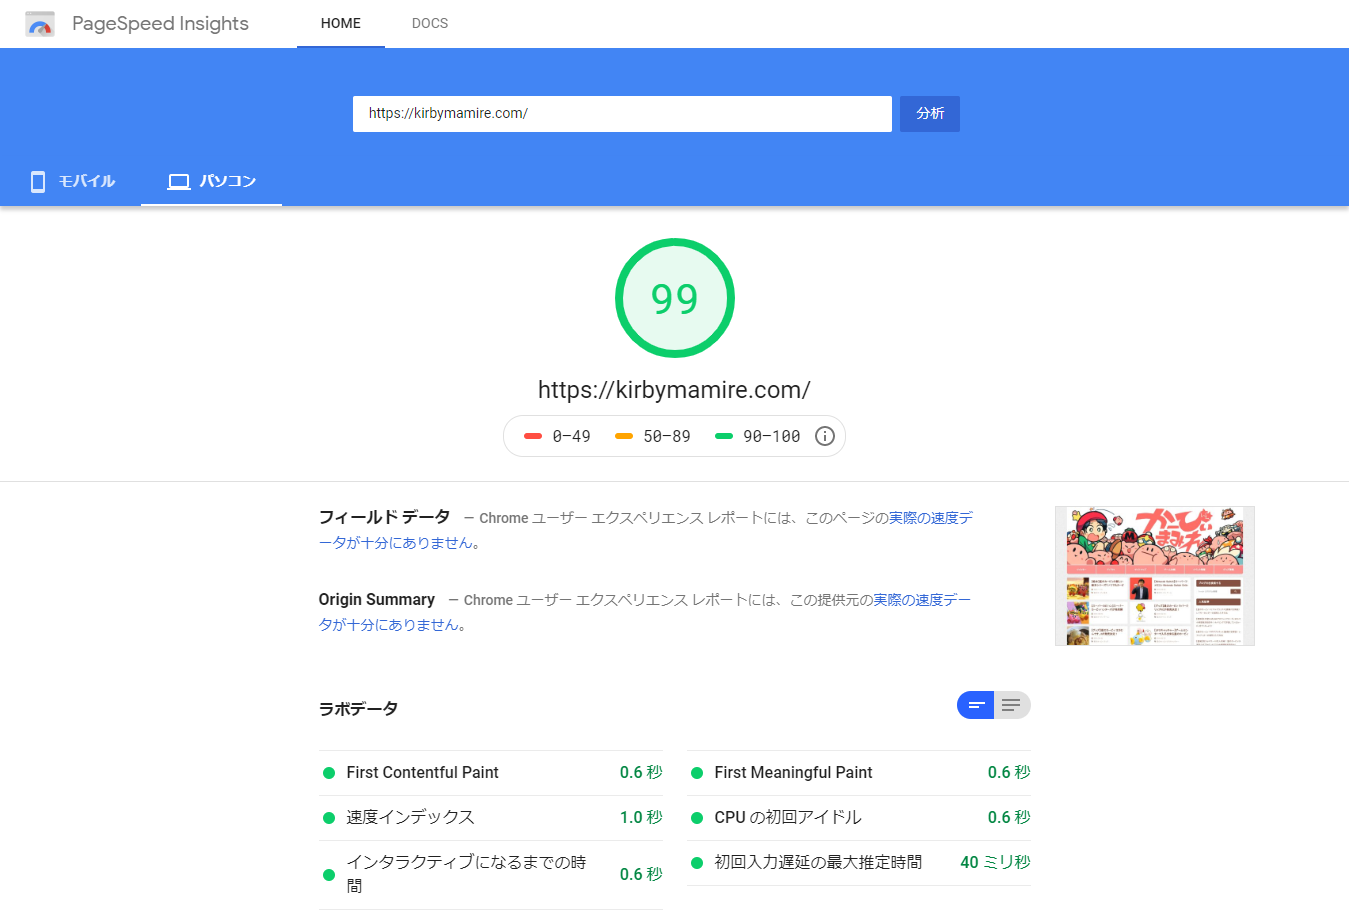 PageSpeed Insightsでの評価